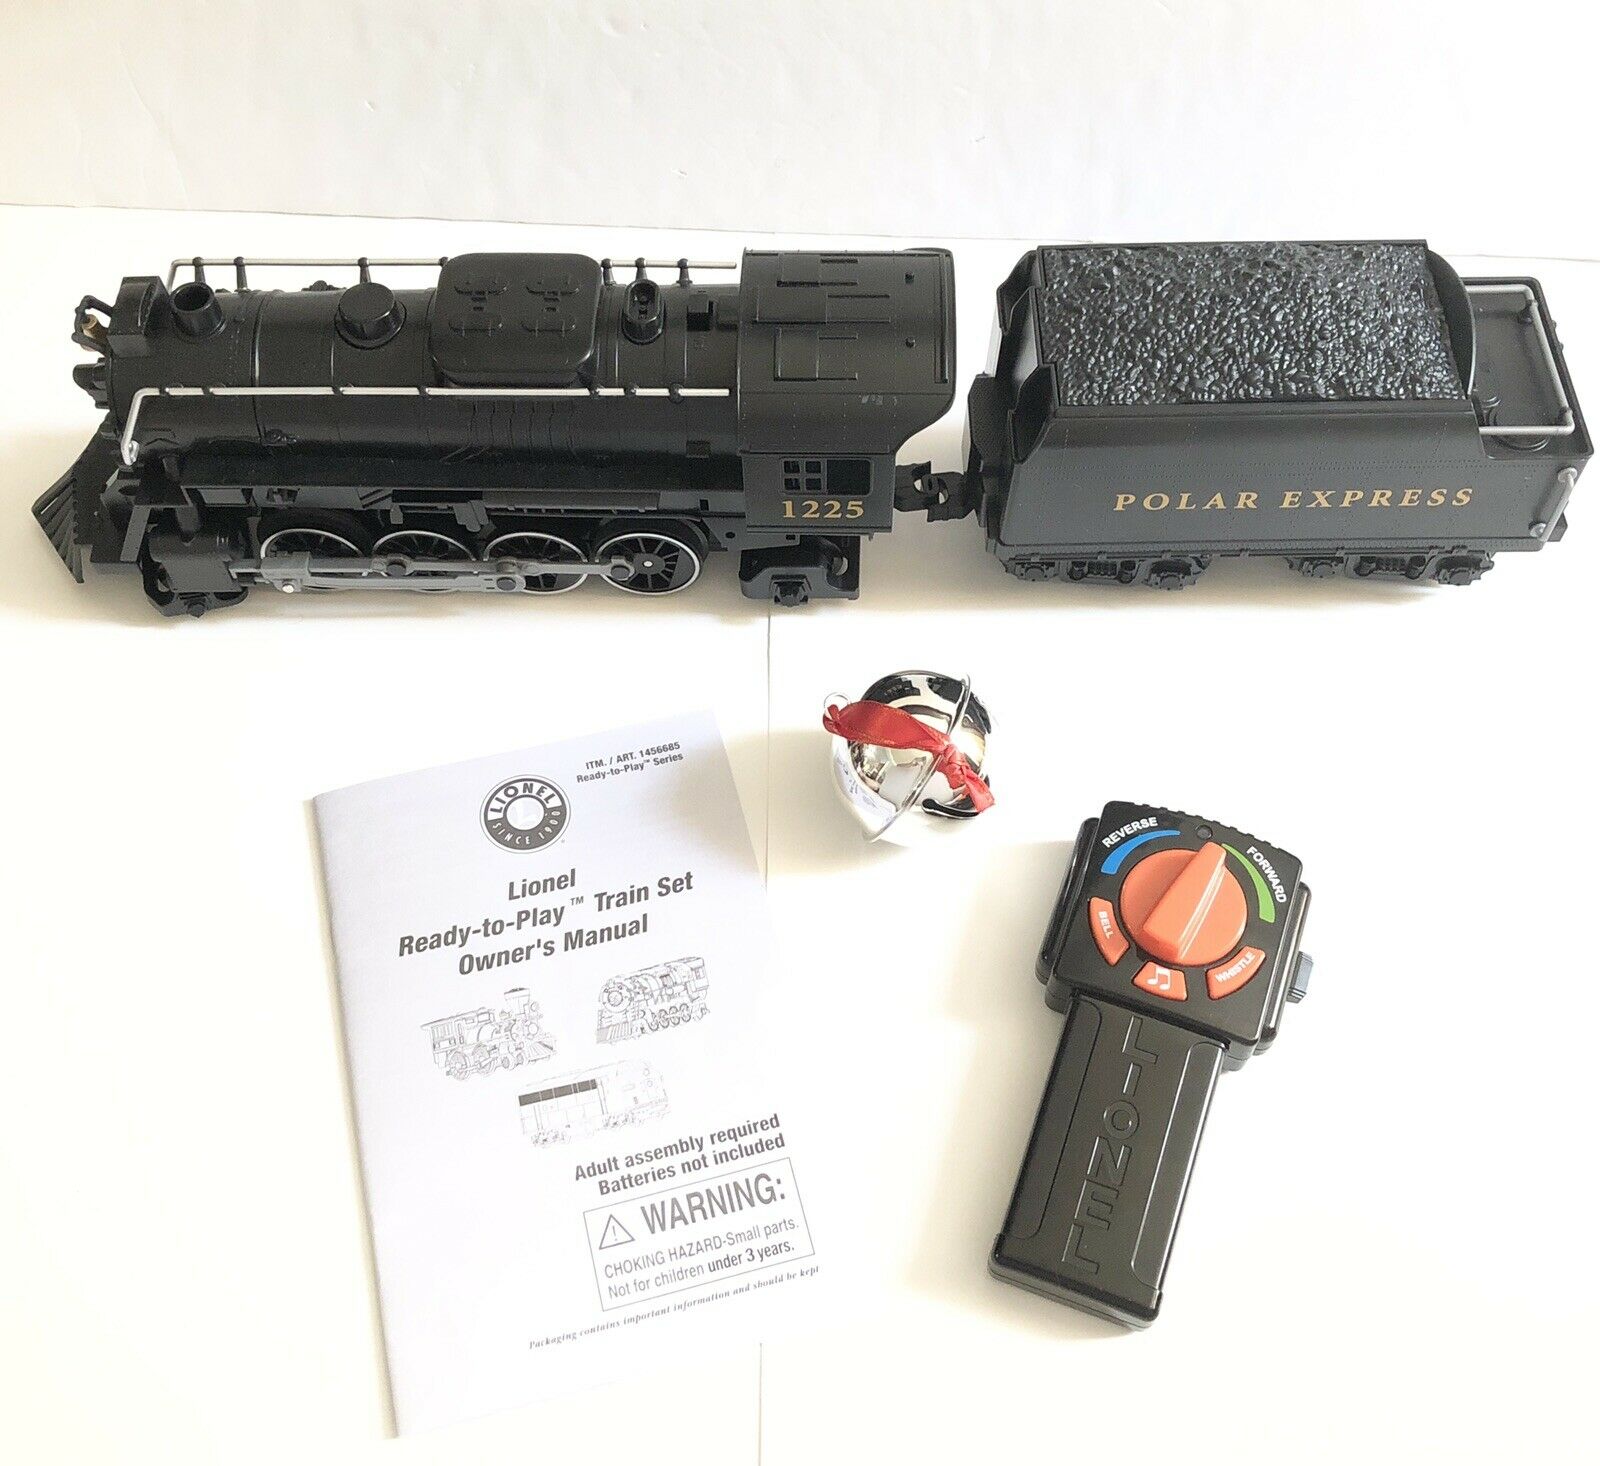 Polar Express Lionel Ready To Play Motorized Engine Tender Remote Bell 7-11824